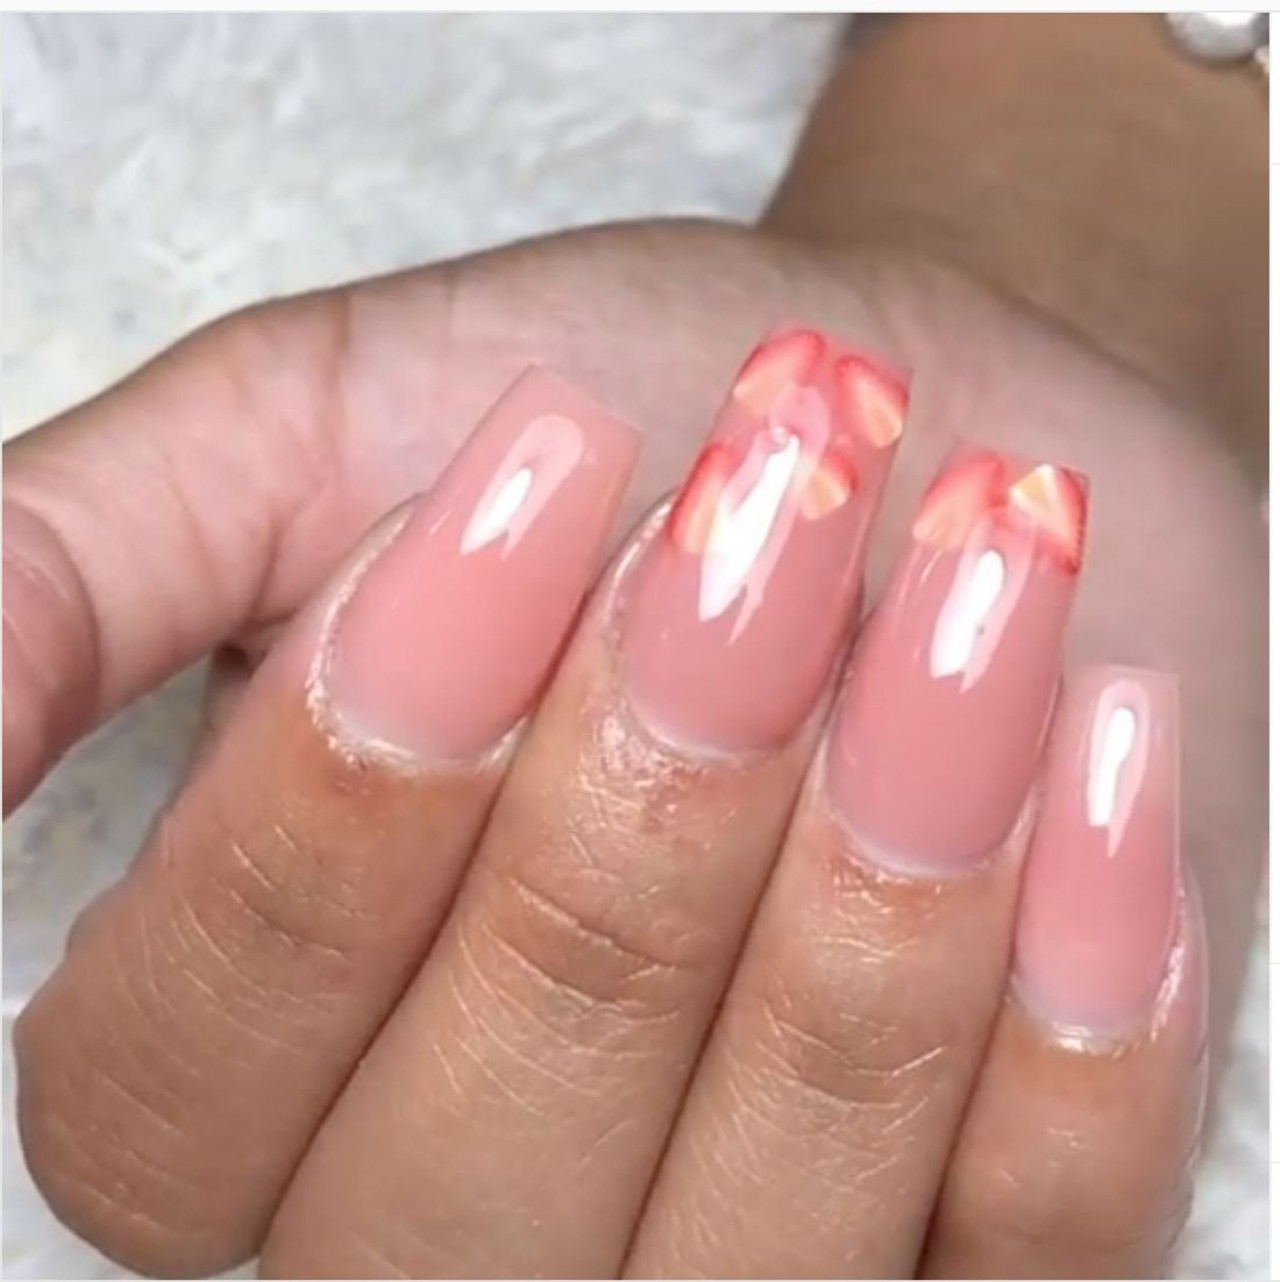 Polished by Terice
@polishedby_terice
17390 W. Eight Mile Rd., Southfield; Appointment by call only: 888-958-0716
Terice has been a nail tech for over 14 years and owns She&#146;s Polished located in Southfield. She does not offer walk-in appointments, but frequently posts on her Instagram when she has openings. 
Photo via  Polished by Terice / Instagram 